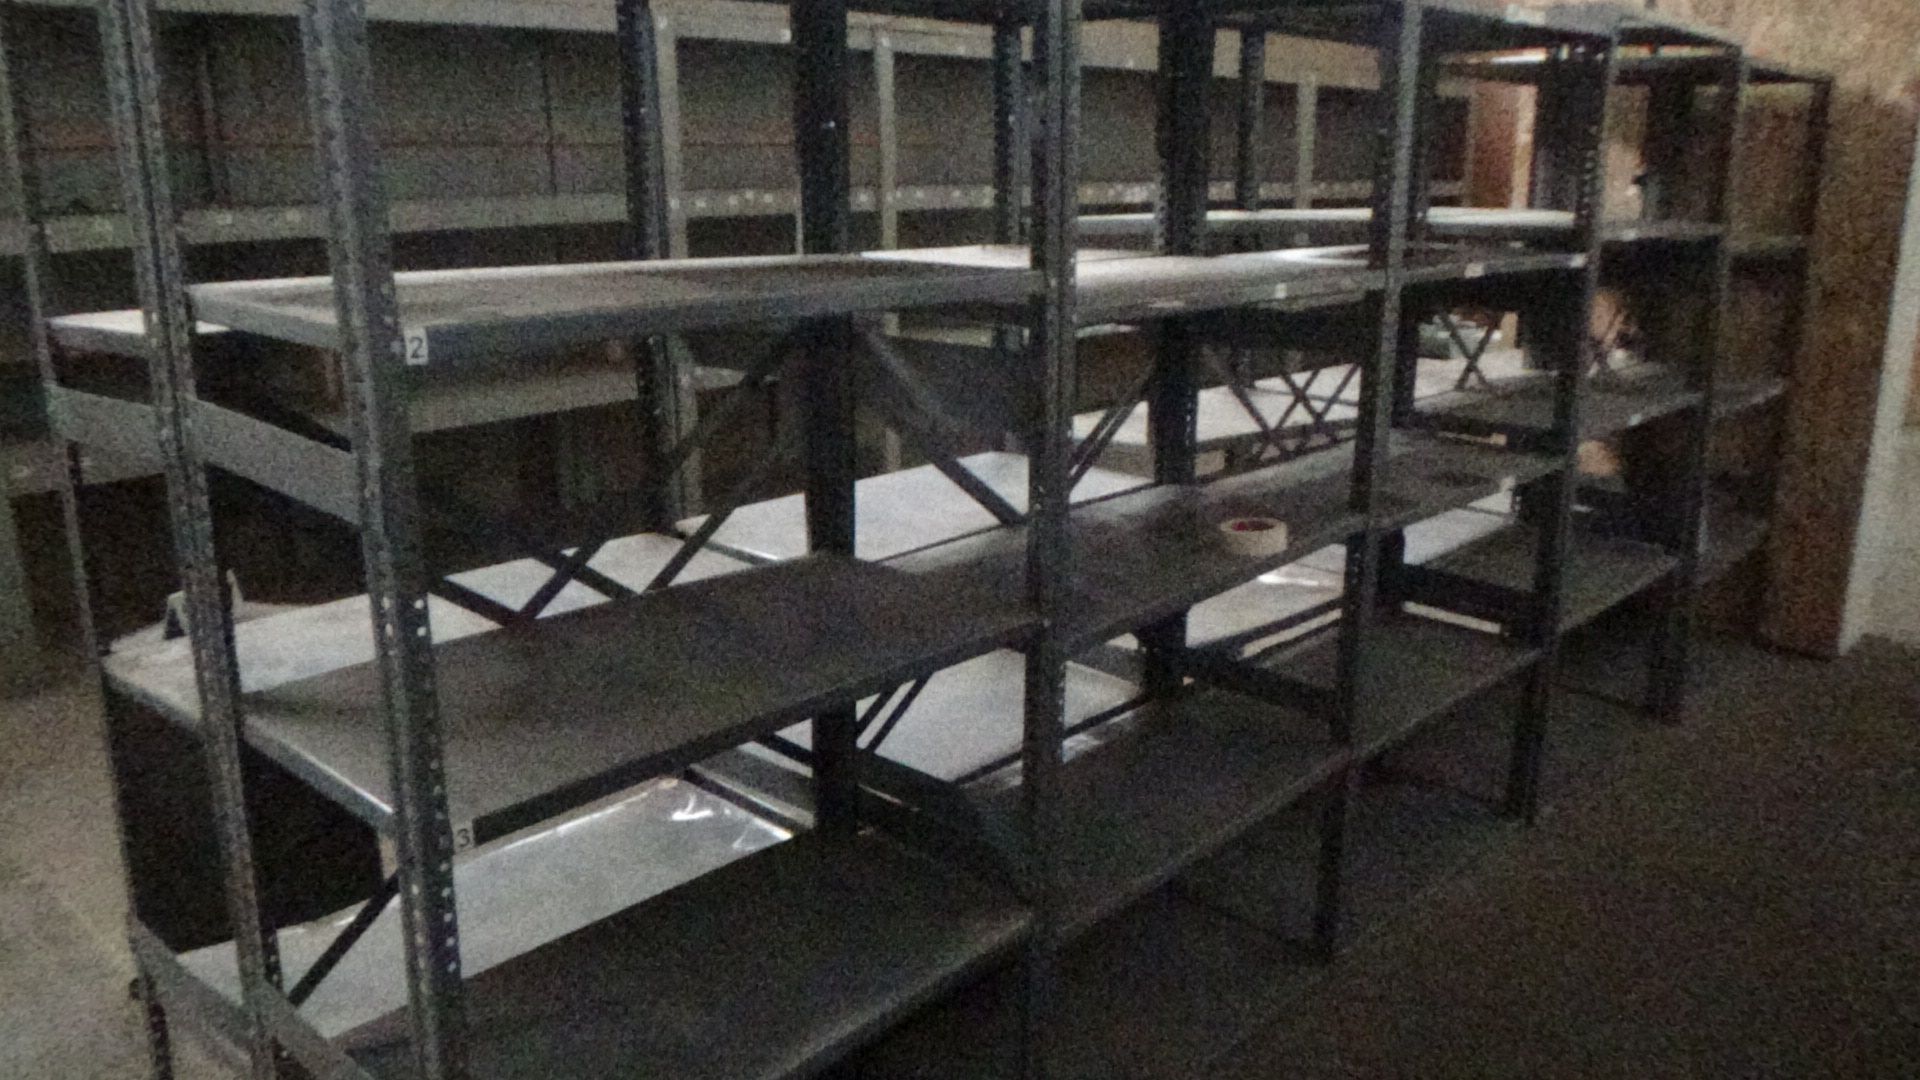 10 metal shelving sections - Image 3 of 3